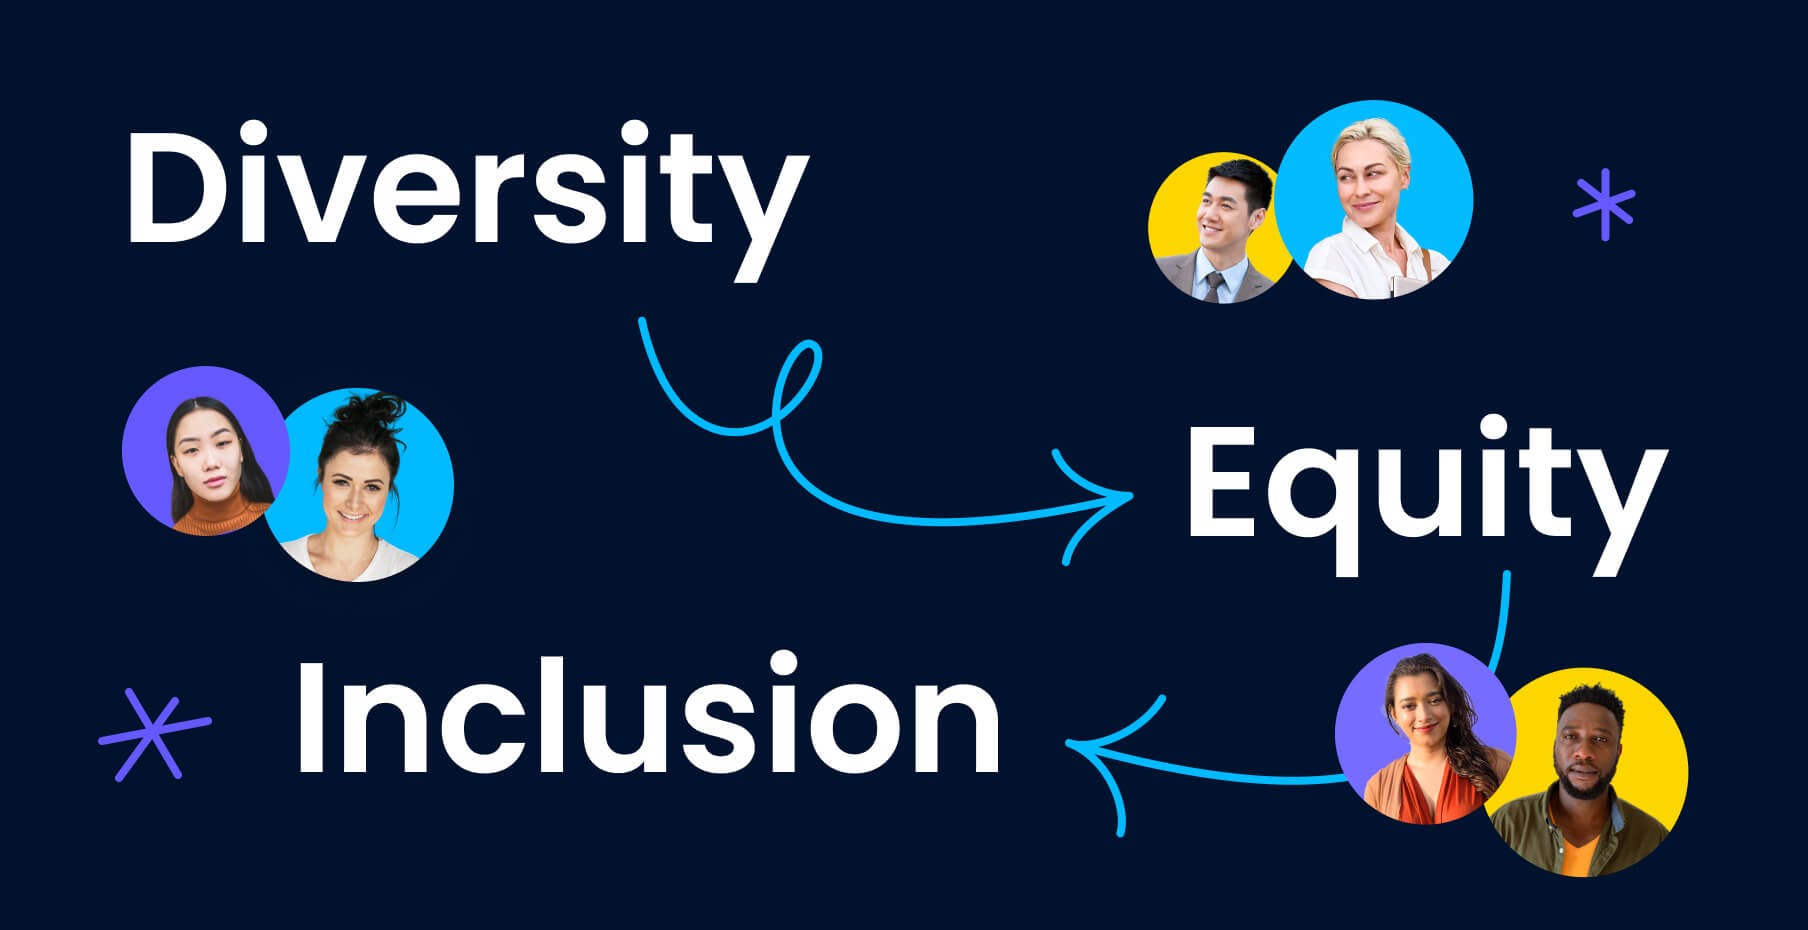 DEI topics feature page: words Diversity, Equity, and Inclusion with diverse icons of people